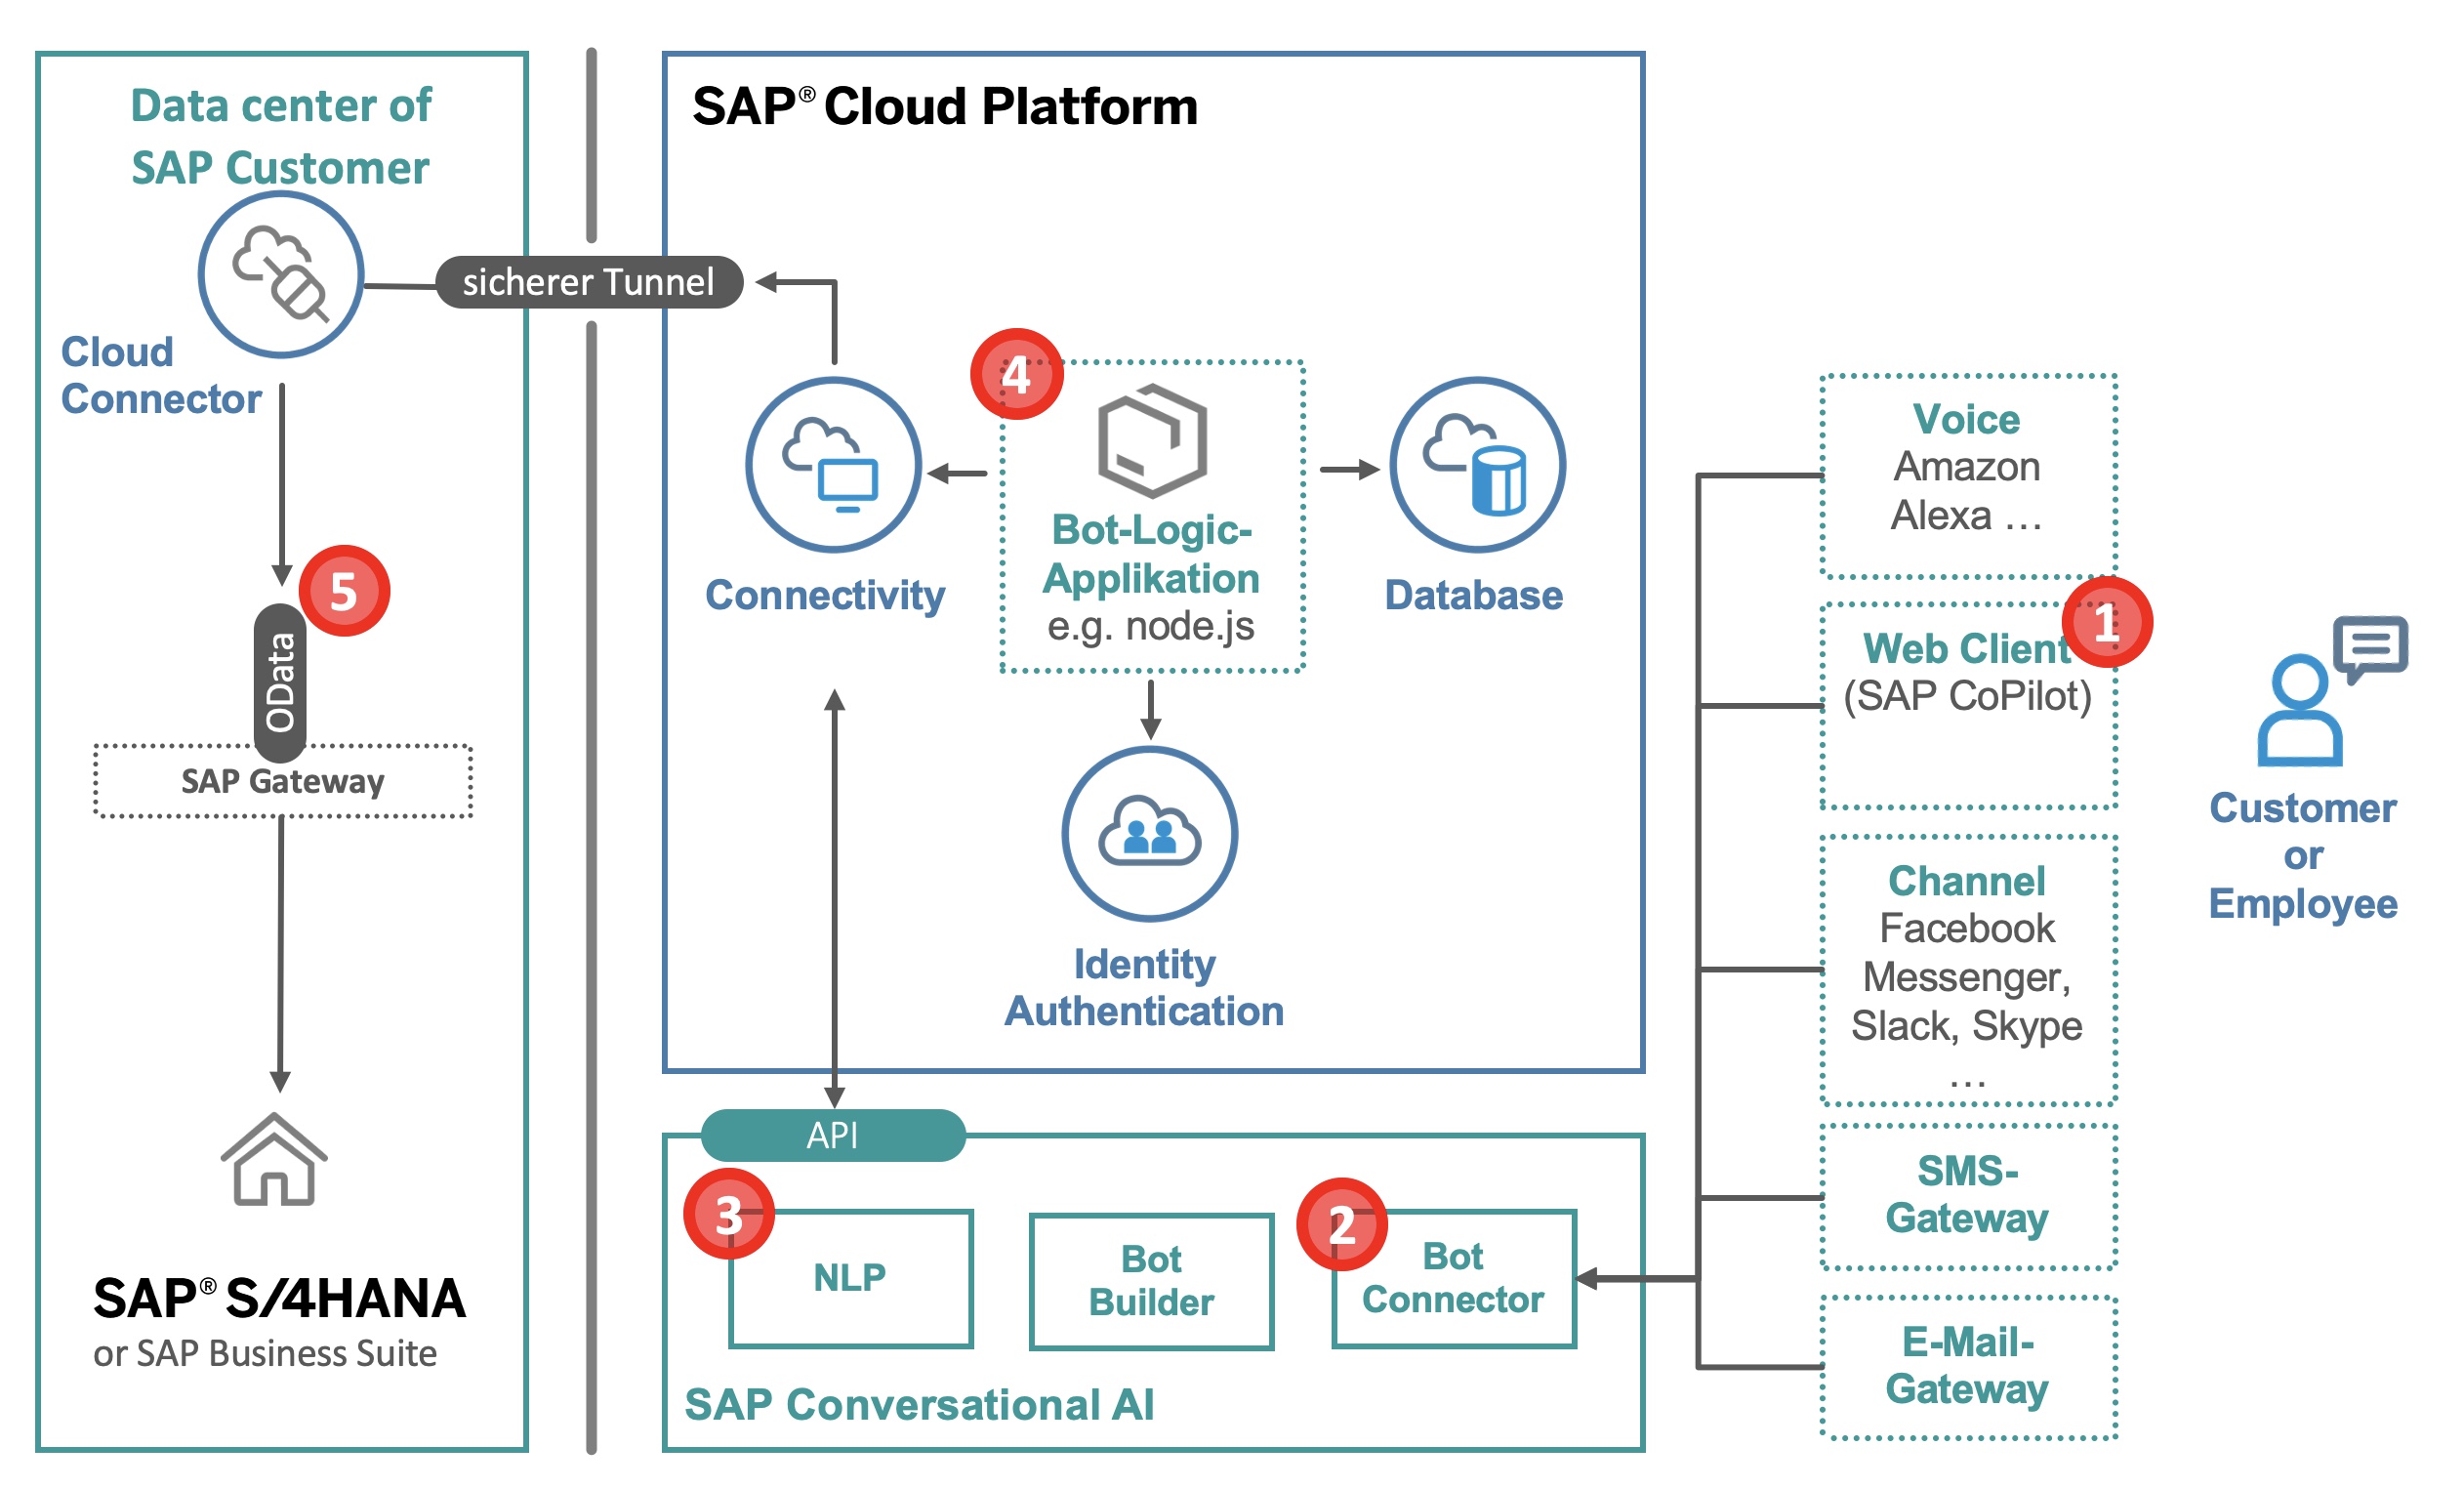 Picture of SAP Conversational AI tools.